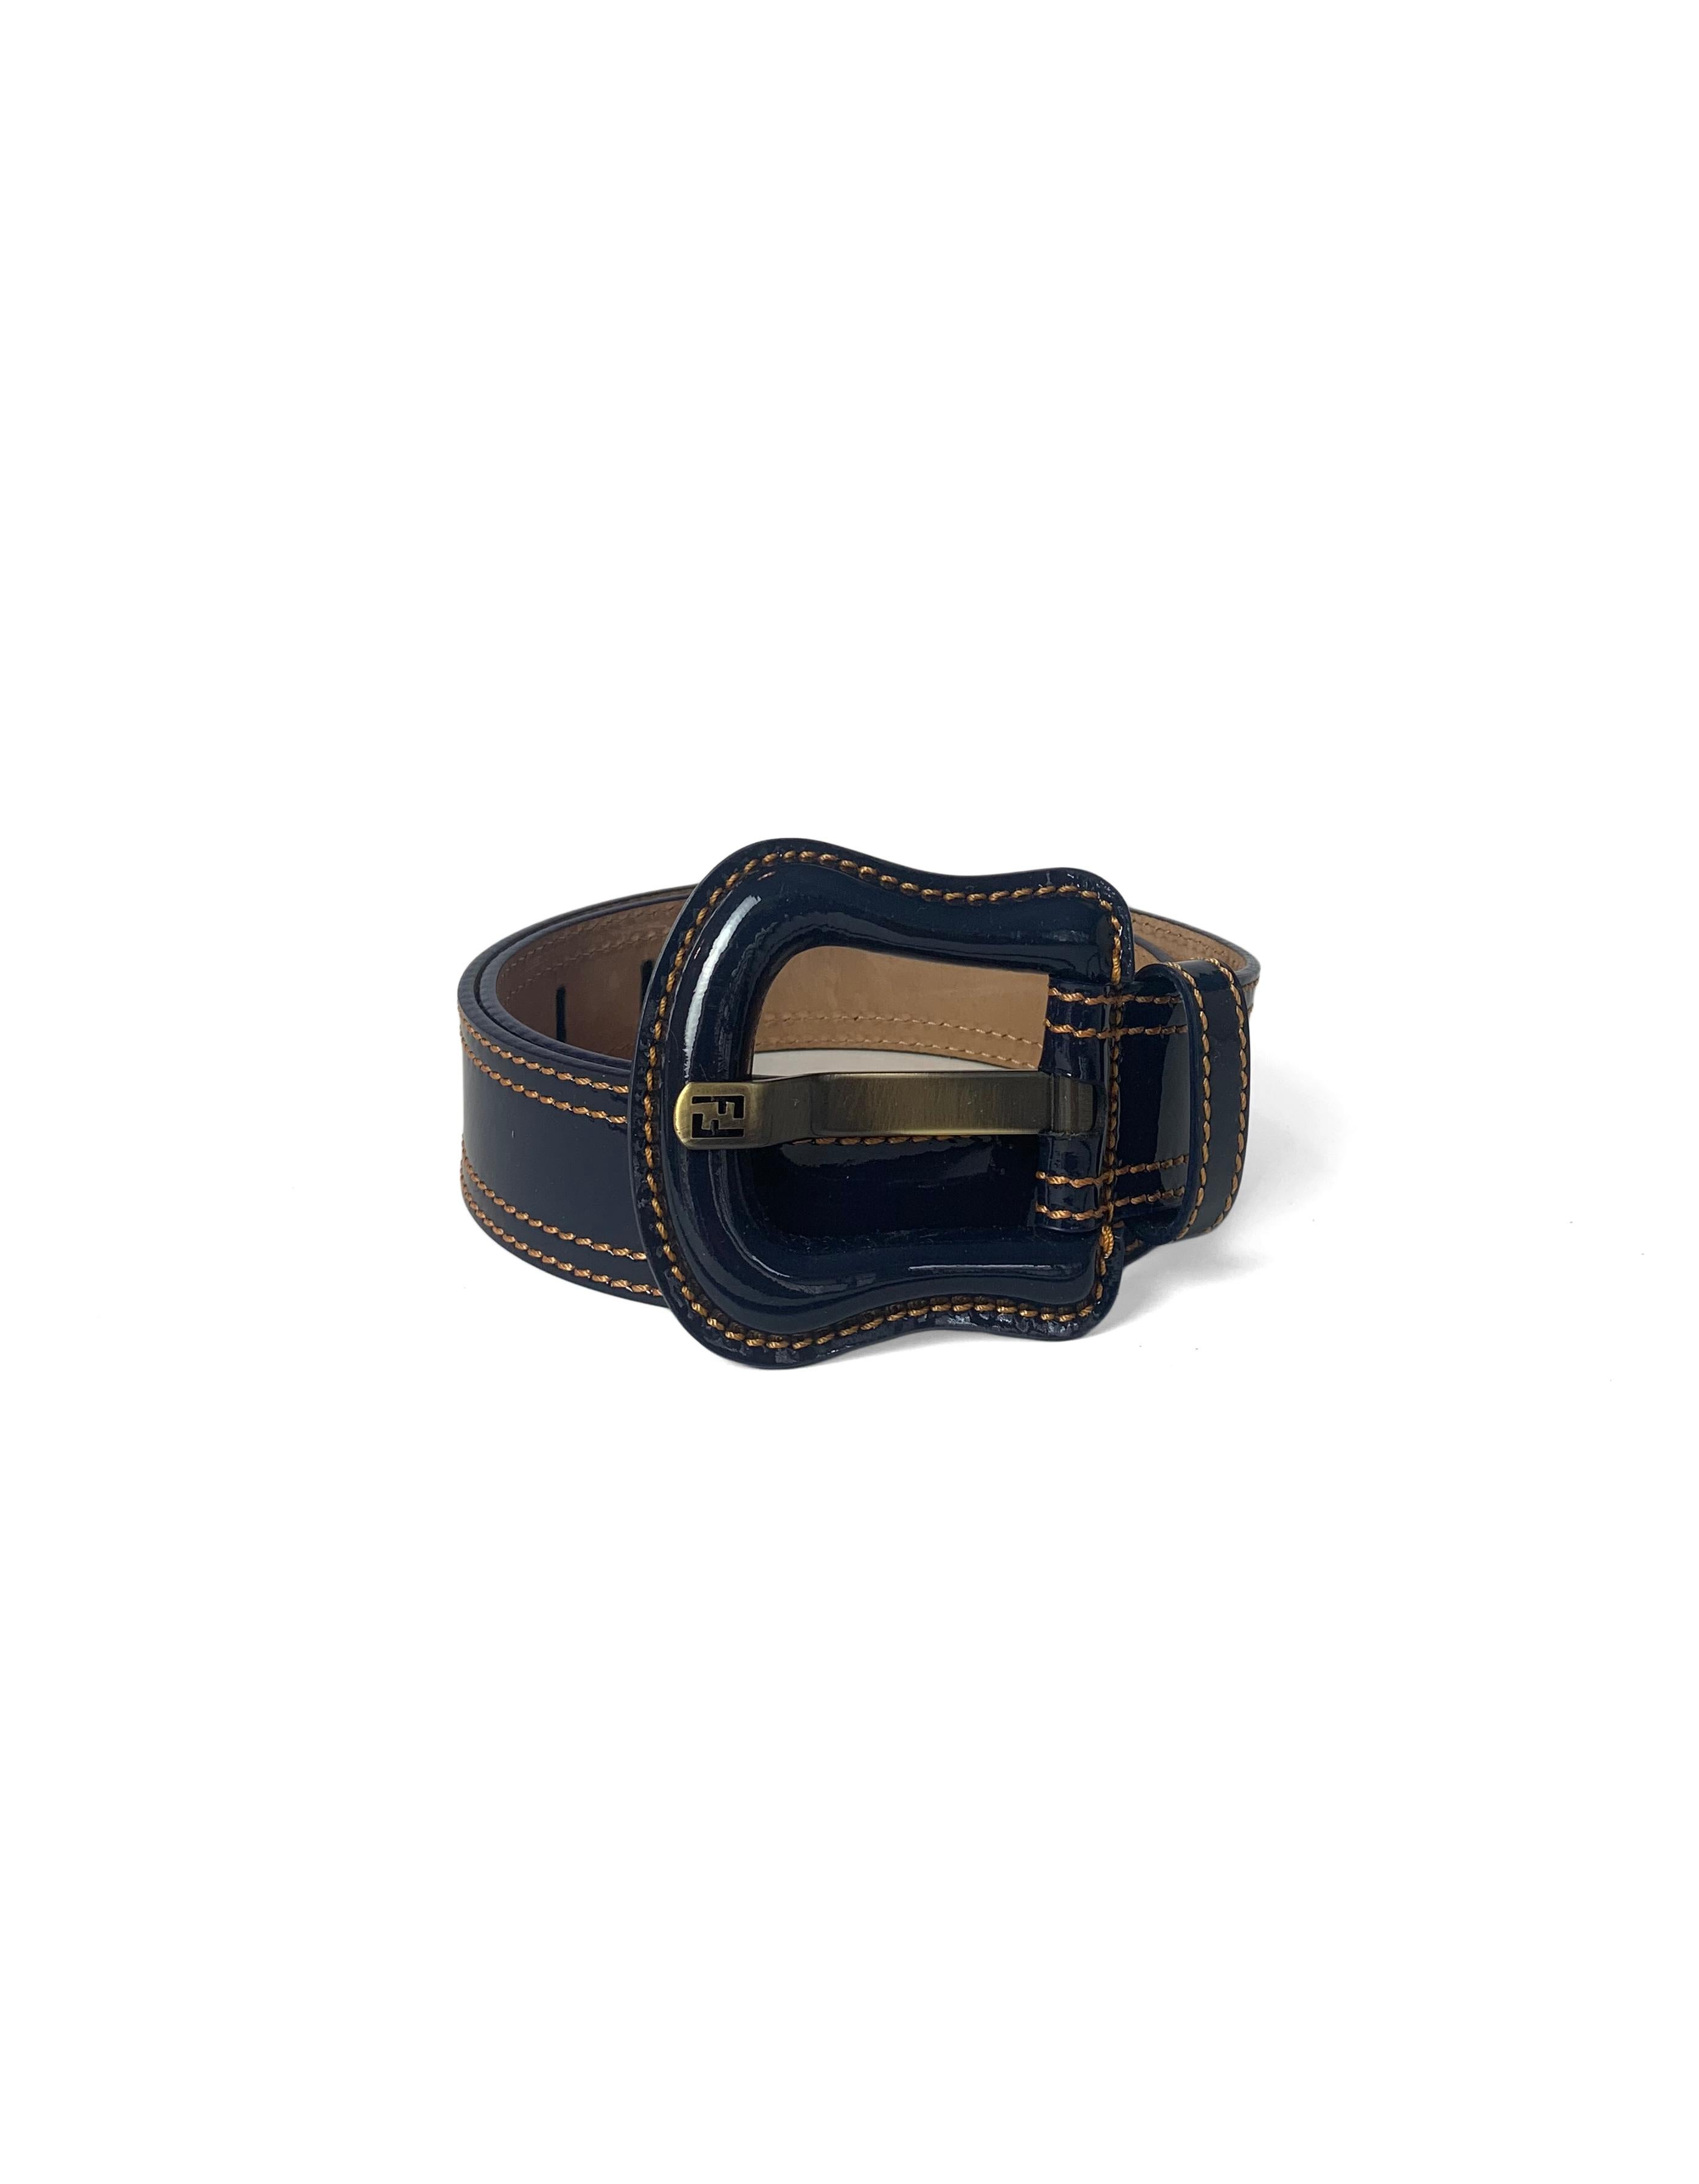 Fendi Navy Blue Patent Leather Buckle Belt sz 75

Made In: Italy
Color: Blue with orange contrast stitching
Hardware: Antiqued goldtone
Materials: Patent leather
Lining: Smooth leather
Closure/Opening: Adjustable buckle
Overall Condition: Excellent